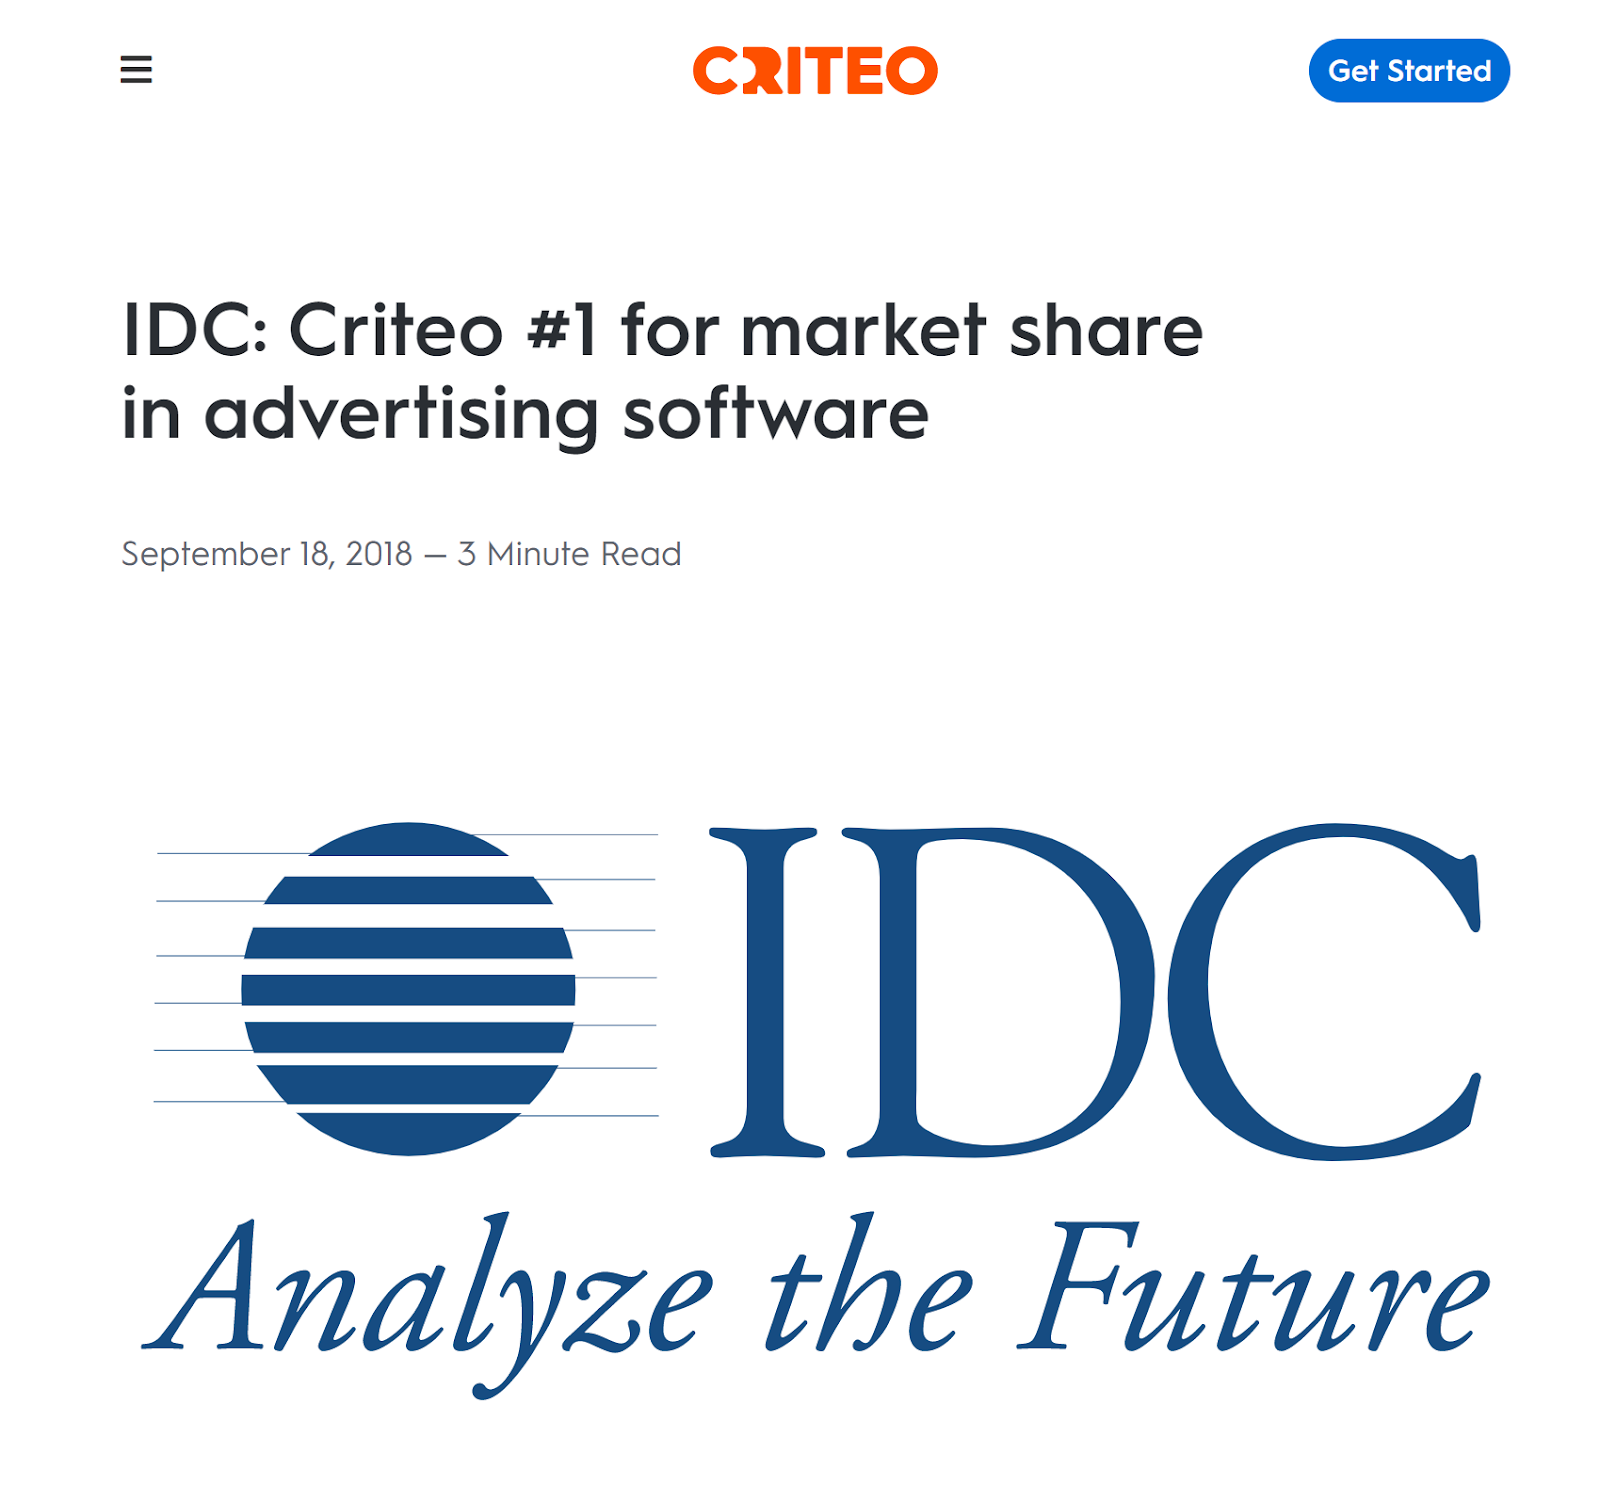 A screenshot of a blog on Criteo's website titled "IDC: Criteo #1 for market share in advertising software"